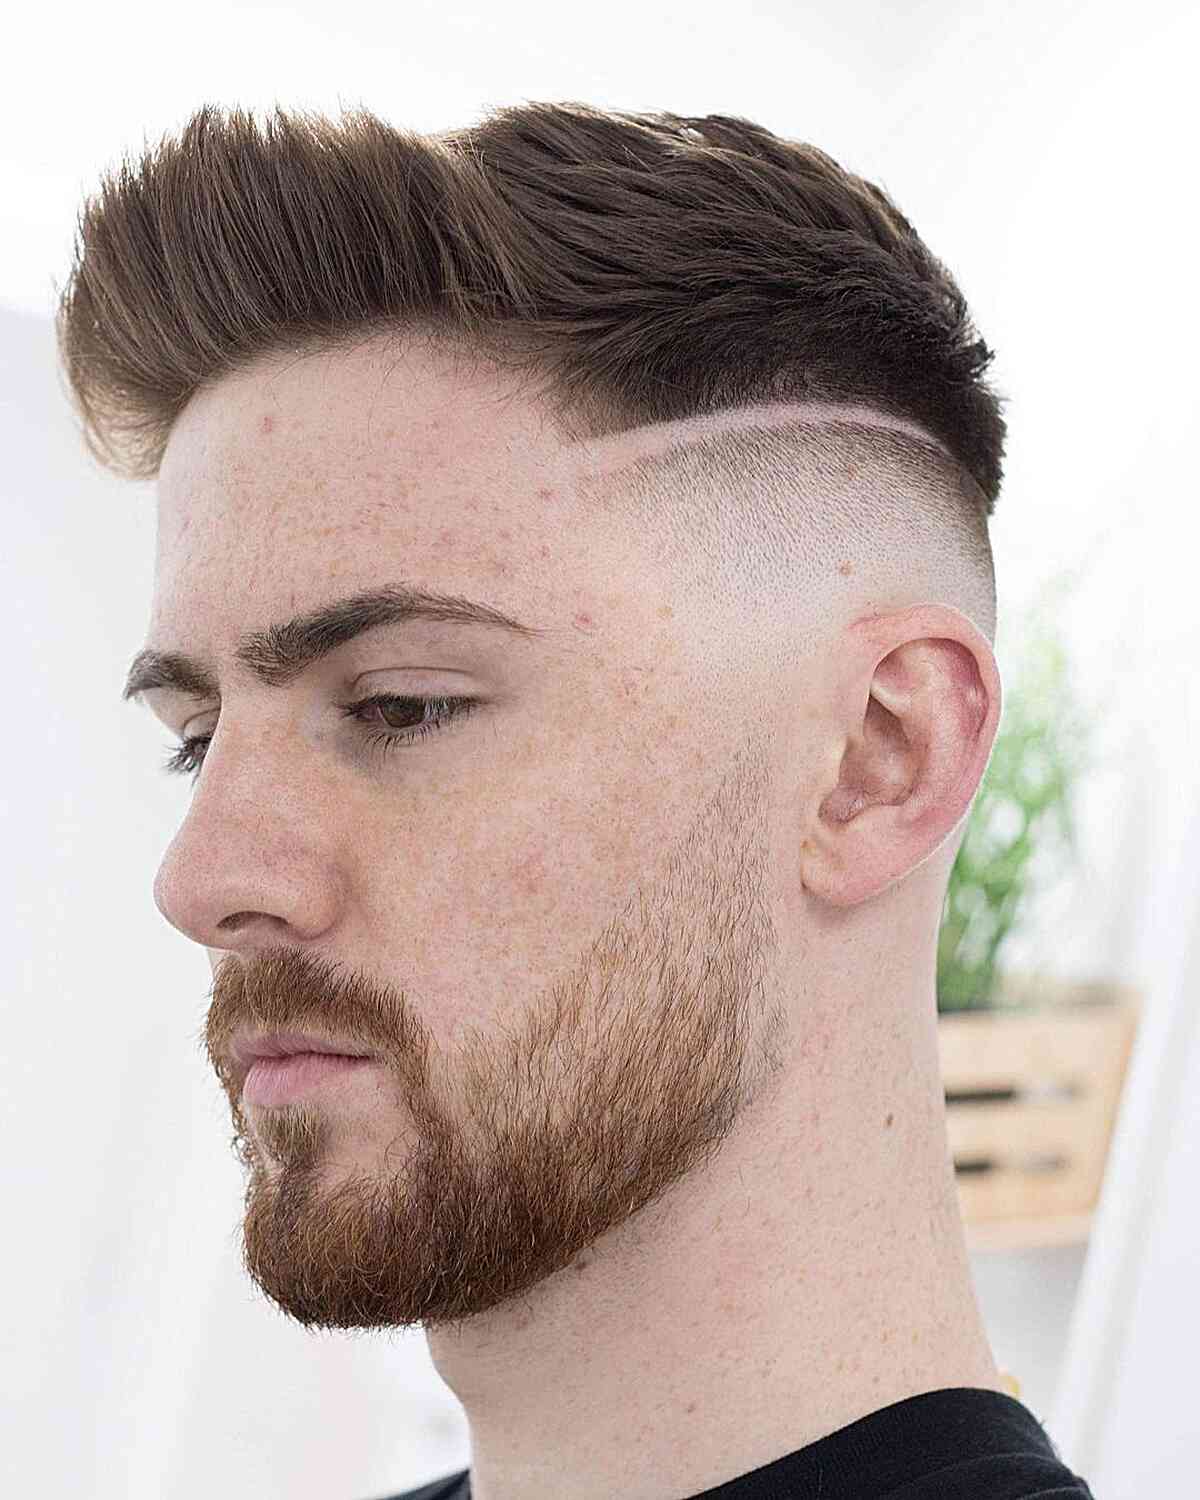 Fuzzy Crew Cut with a Shaved Line and Brushed-Up Style for Fine-Haired Men